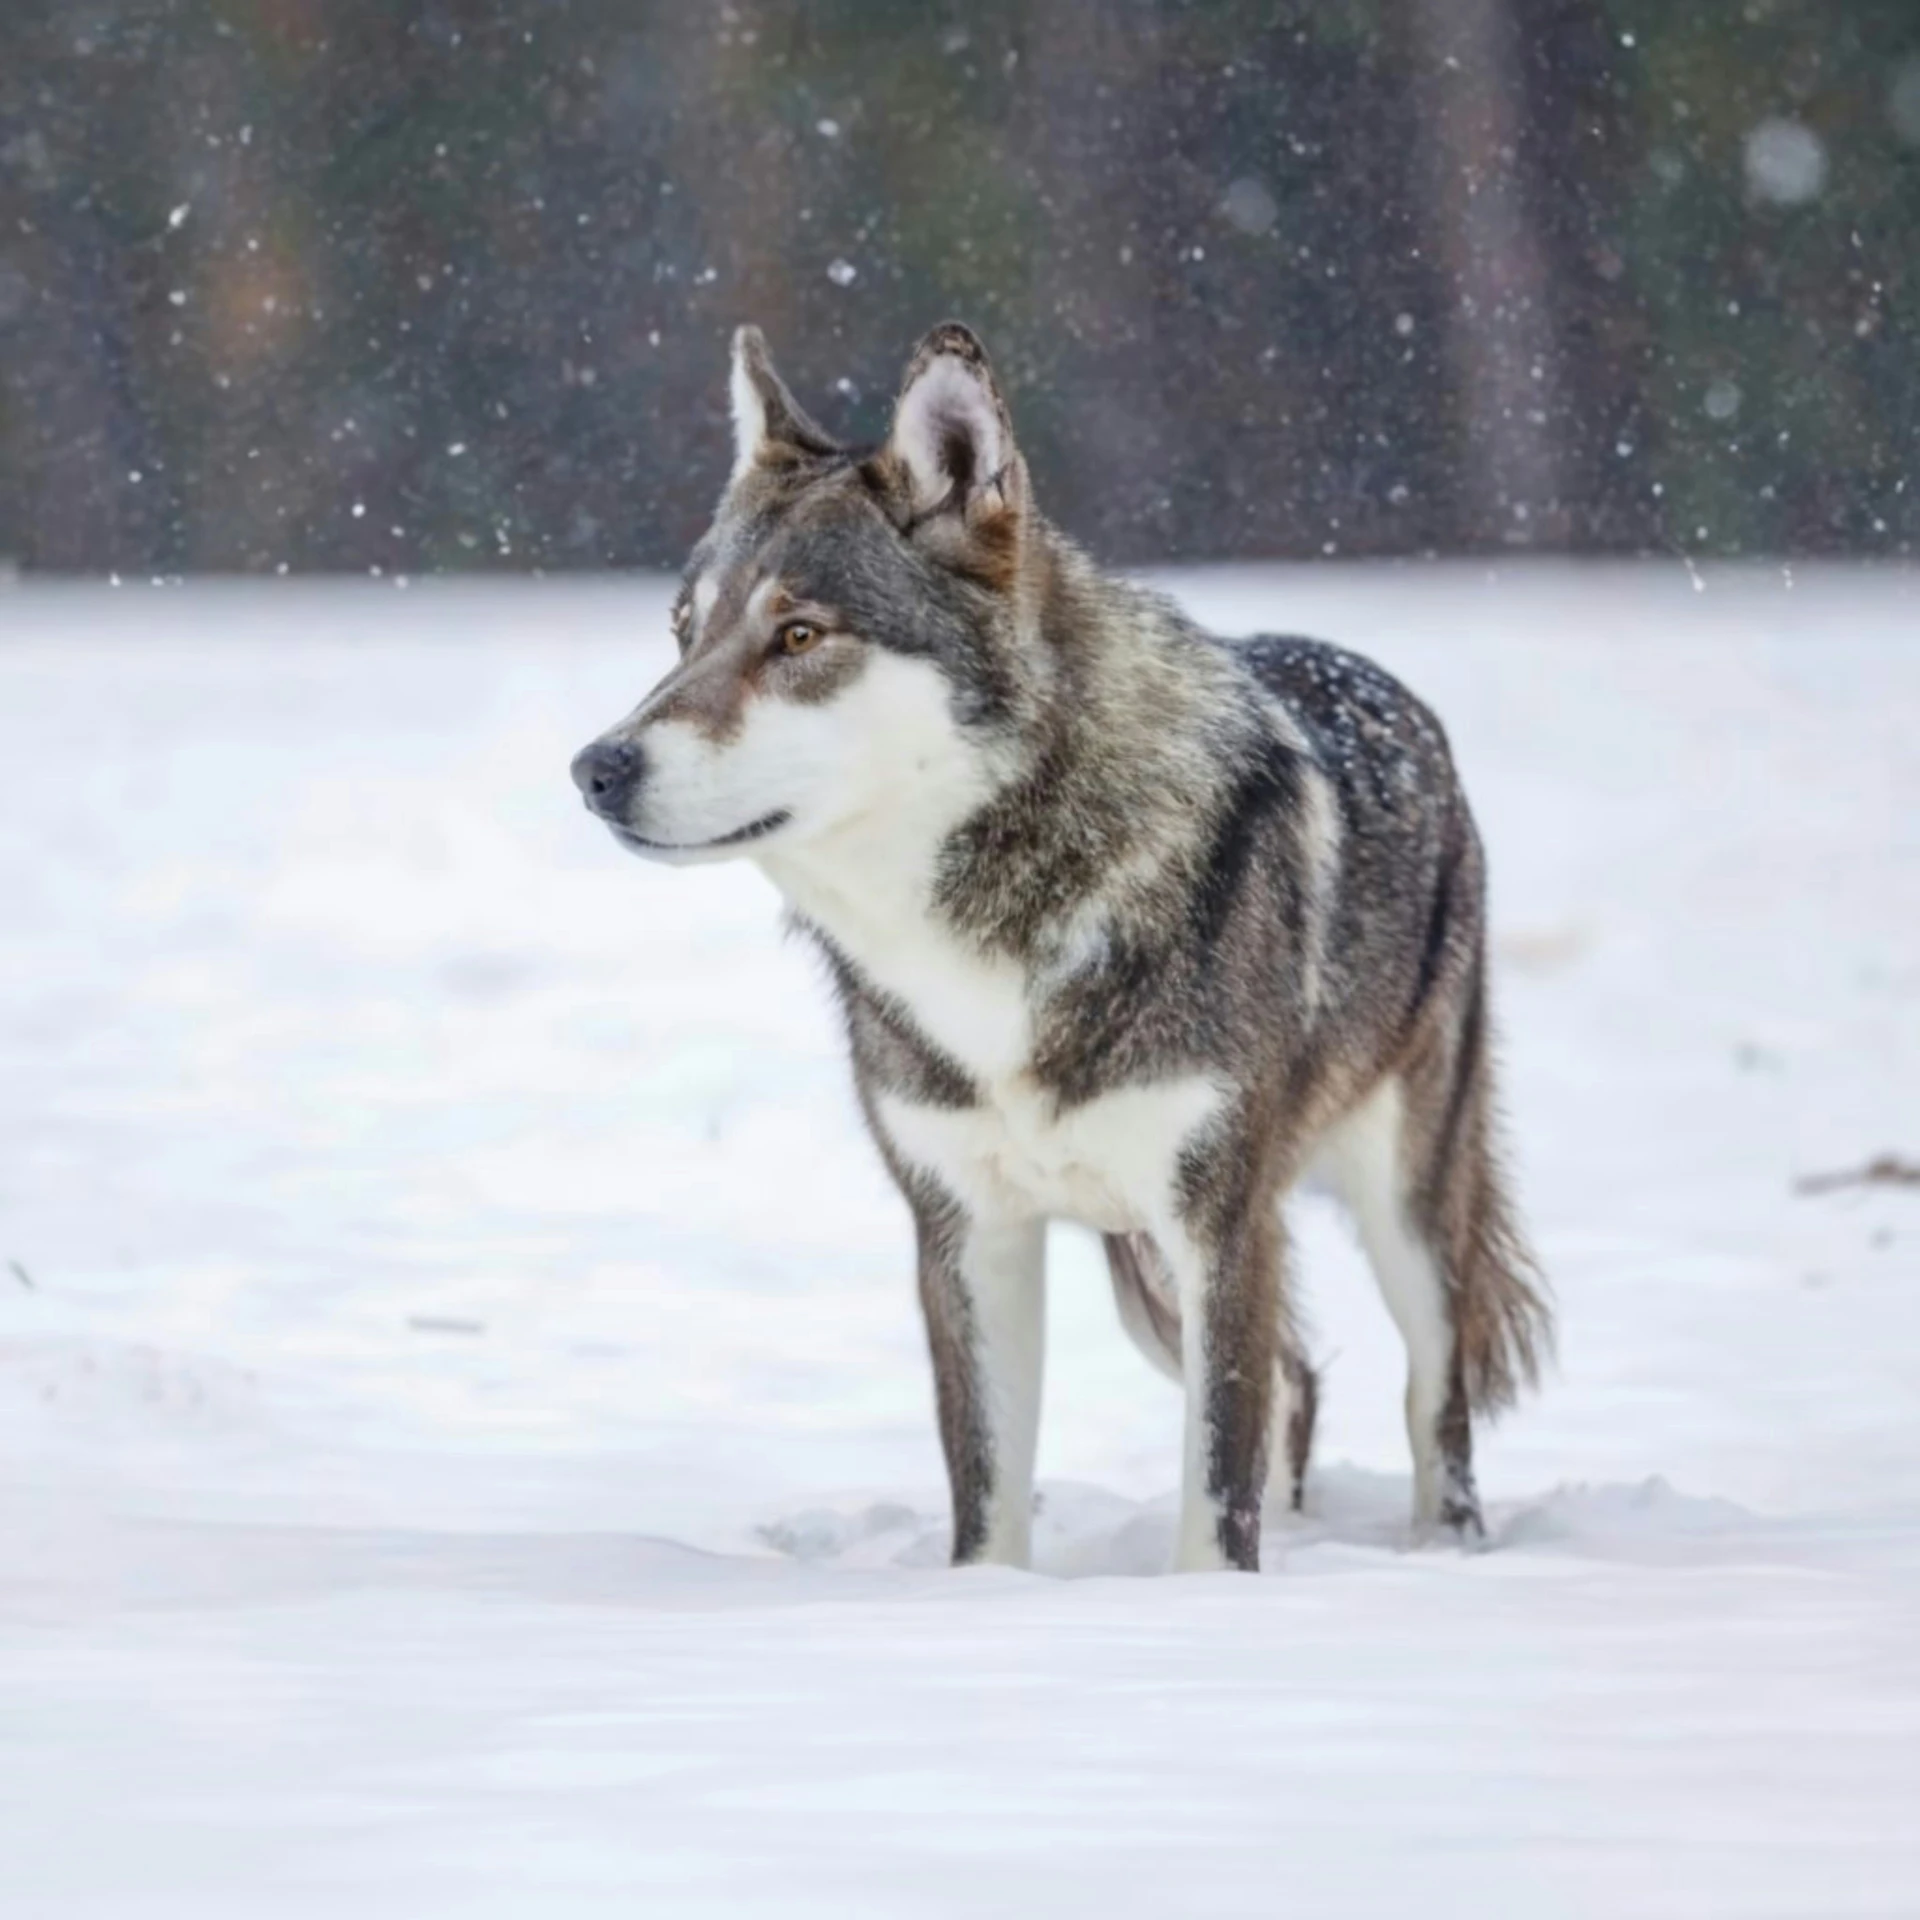 a wolf stands alone in the snow in a park